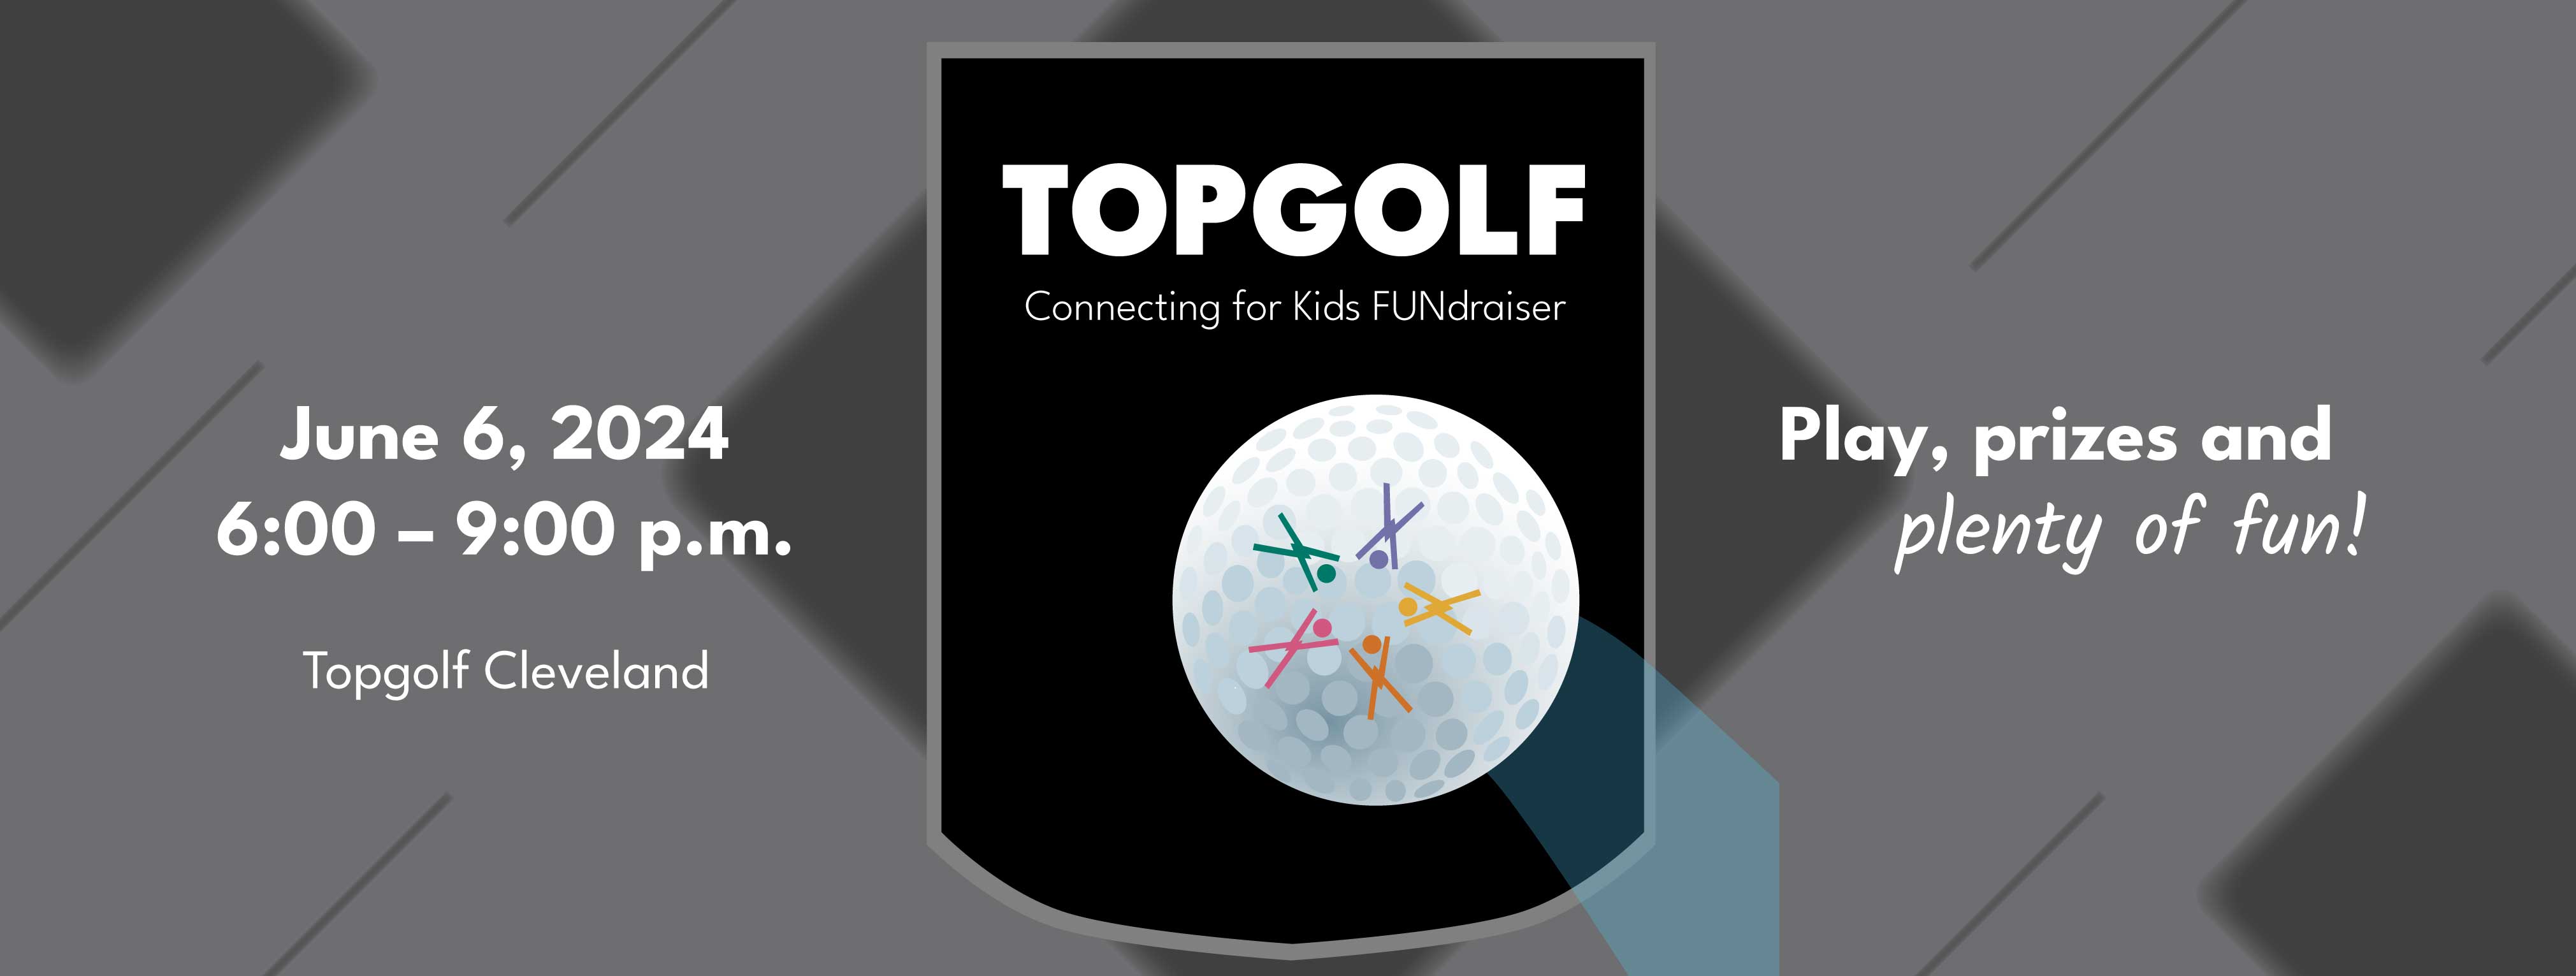 Connecting for Kids Topgolf Fundraiser title